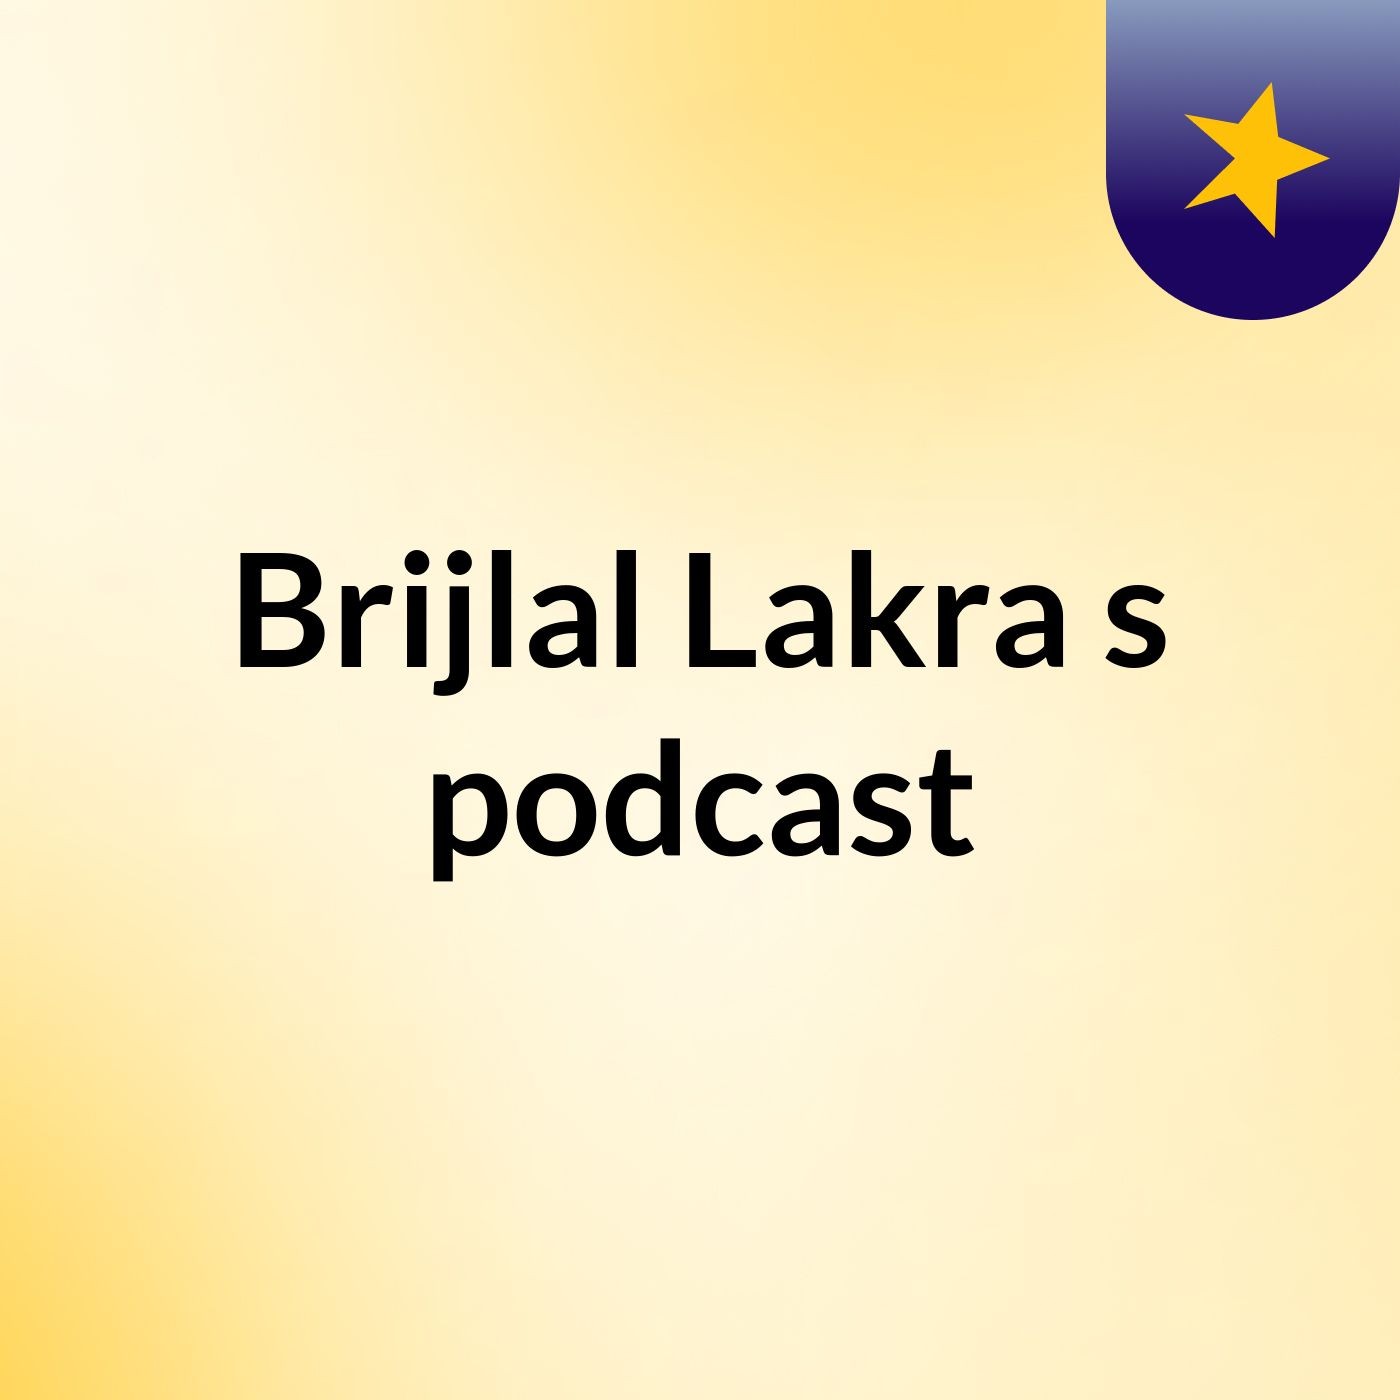 Episode 2 - Brijlal Lakra's podcast